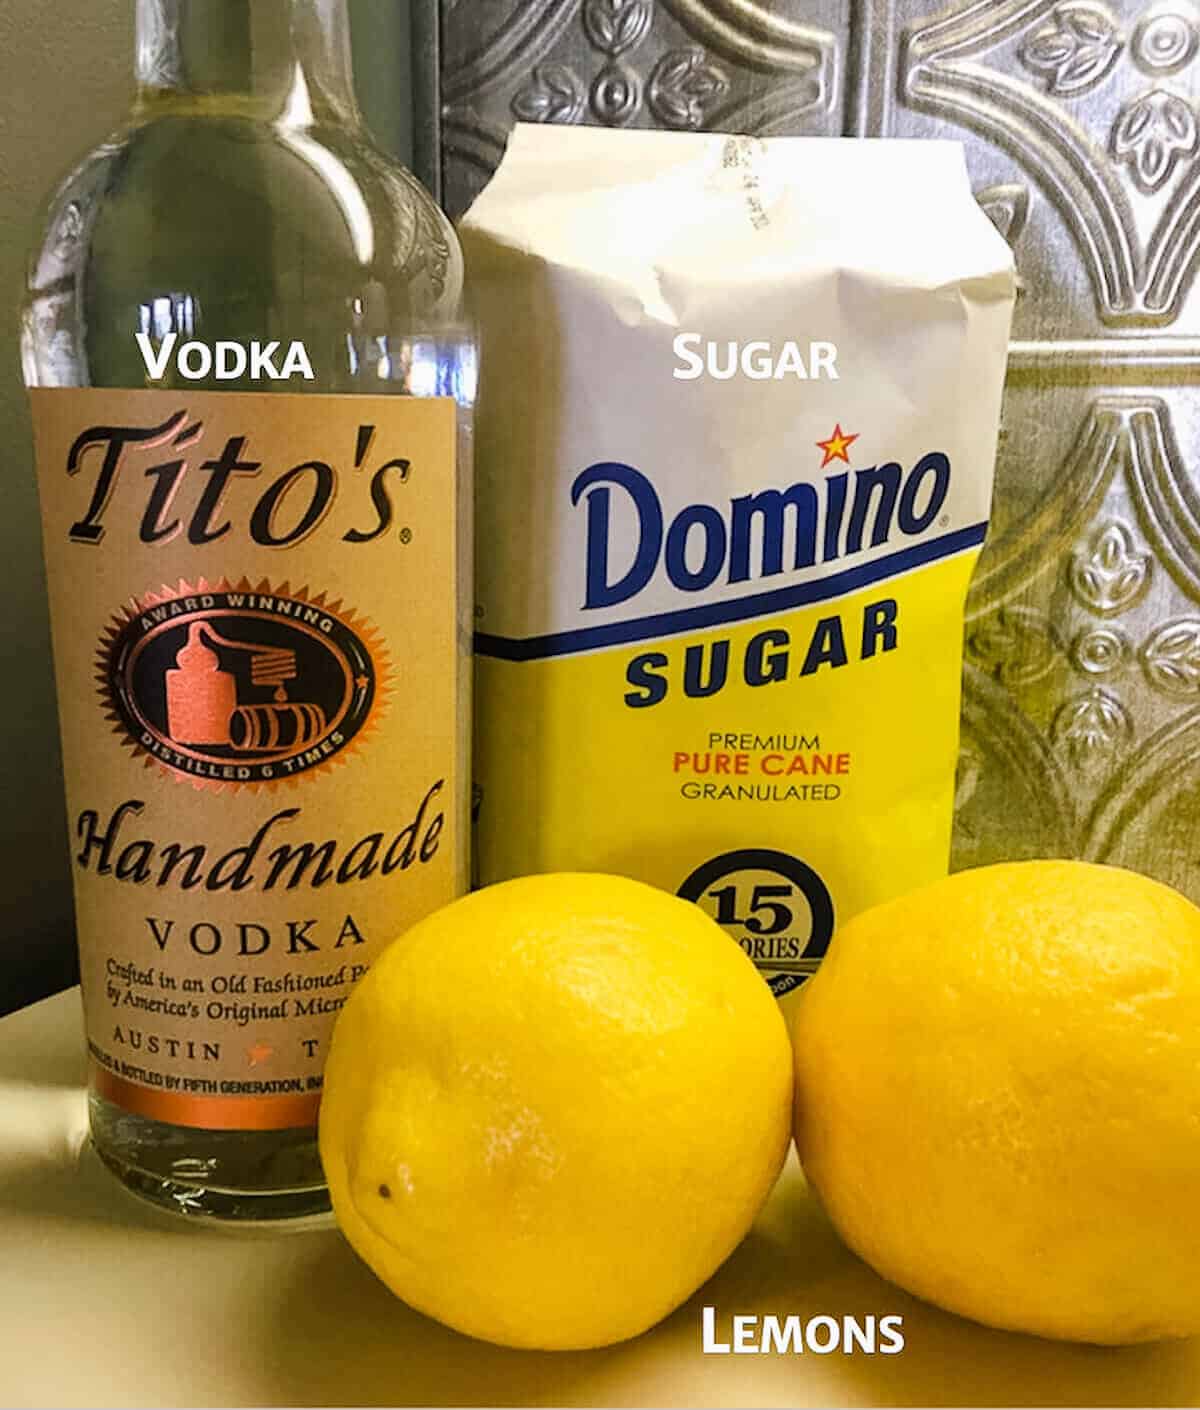 Vodka and sugar in their packaging with 2 lemons.